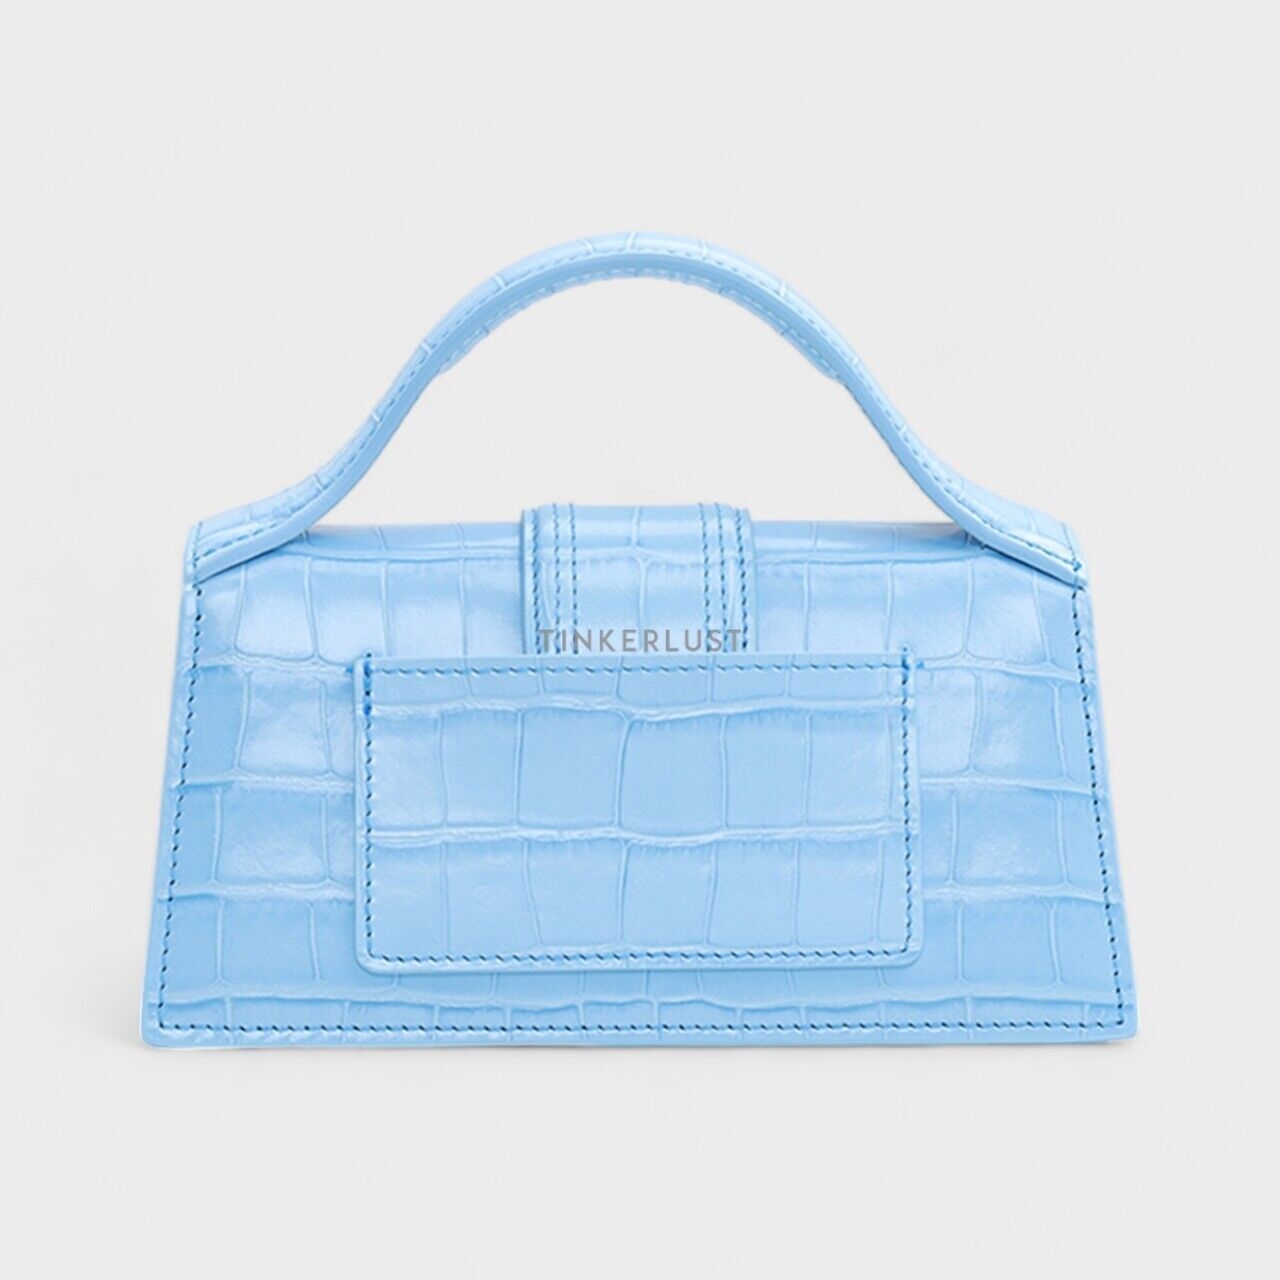 Jacquemus Le Bambino in Blue Crocodile Effect Leather Satchel Bag